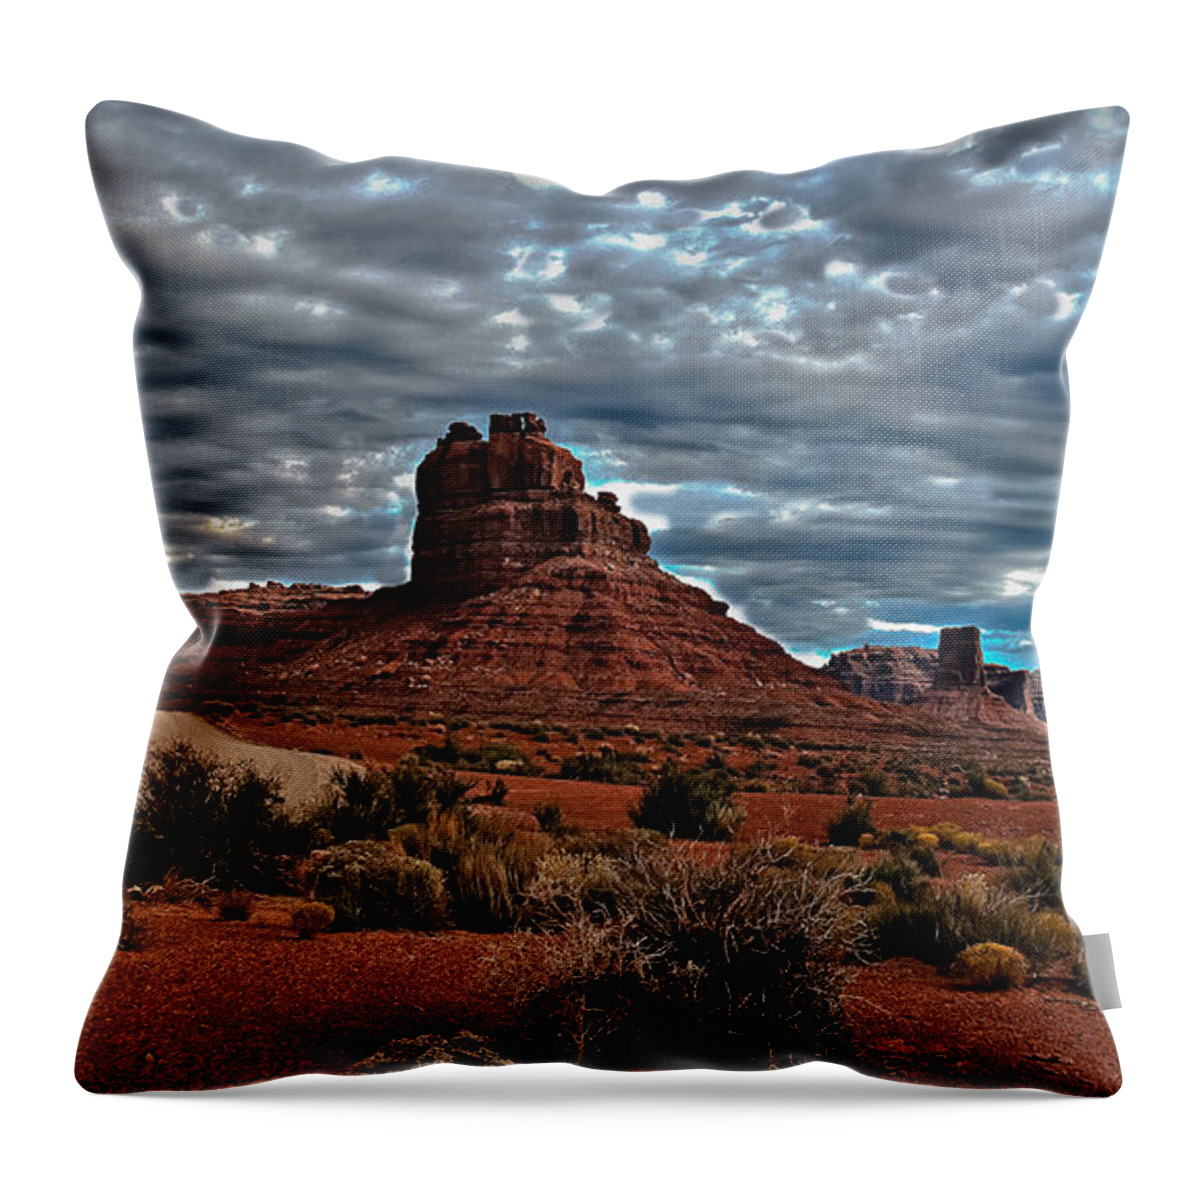  Throw Pillow featuring the photograph Valley Of The Gods II by Robert Bales